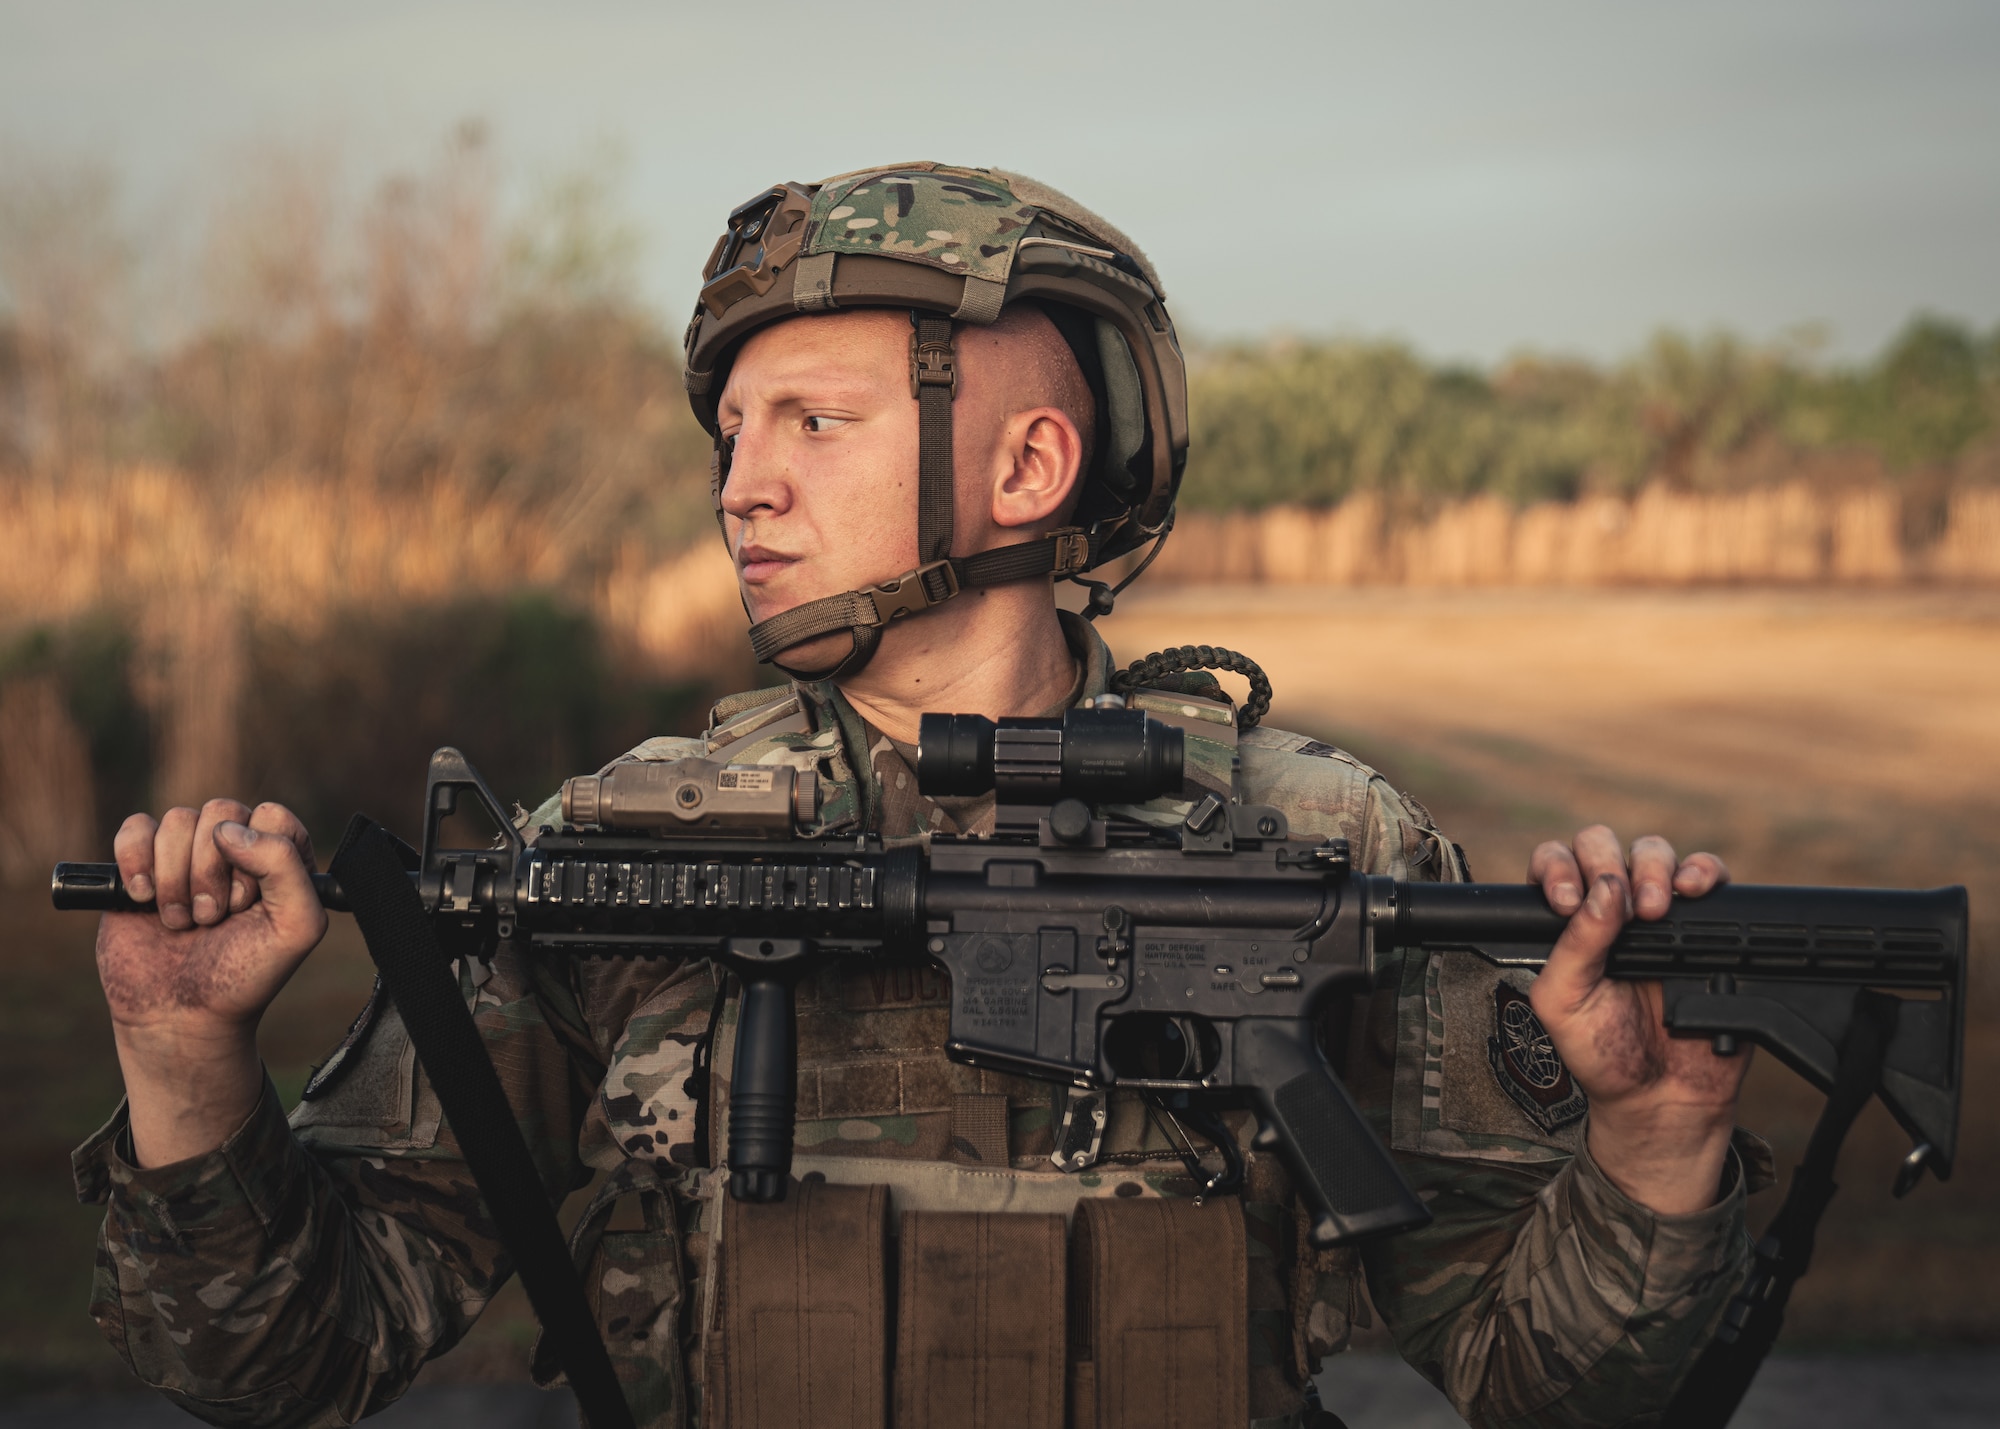 U.S. Air Force Senior Airman Ethan Vuckovich, 6th Security Forces Squadron commercial search gate member, runs through weapons exercises during Emergency Services Team (EST) tryouts at MacDill Air Force Base, Florida, Feb. 4, 2022.